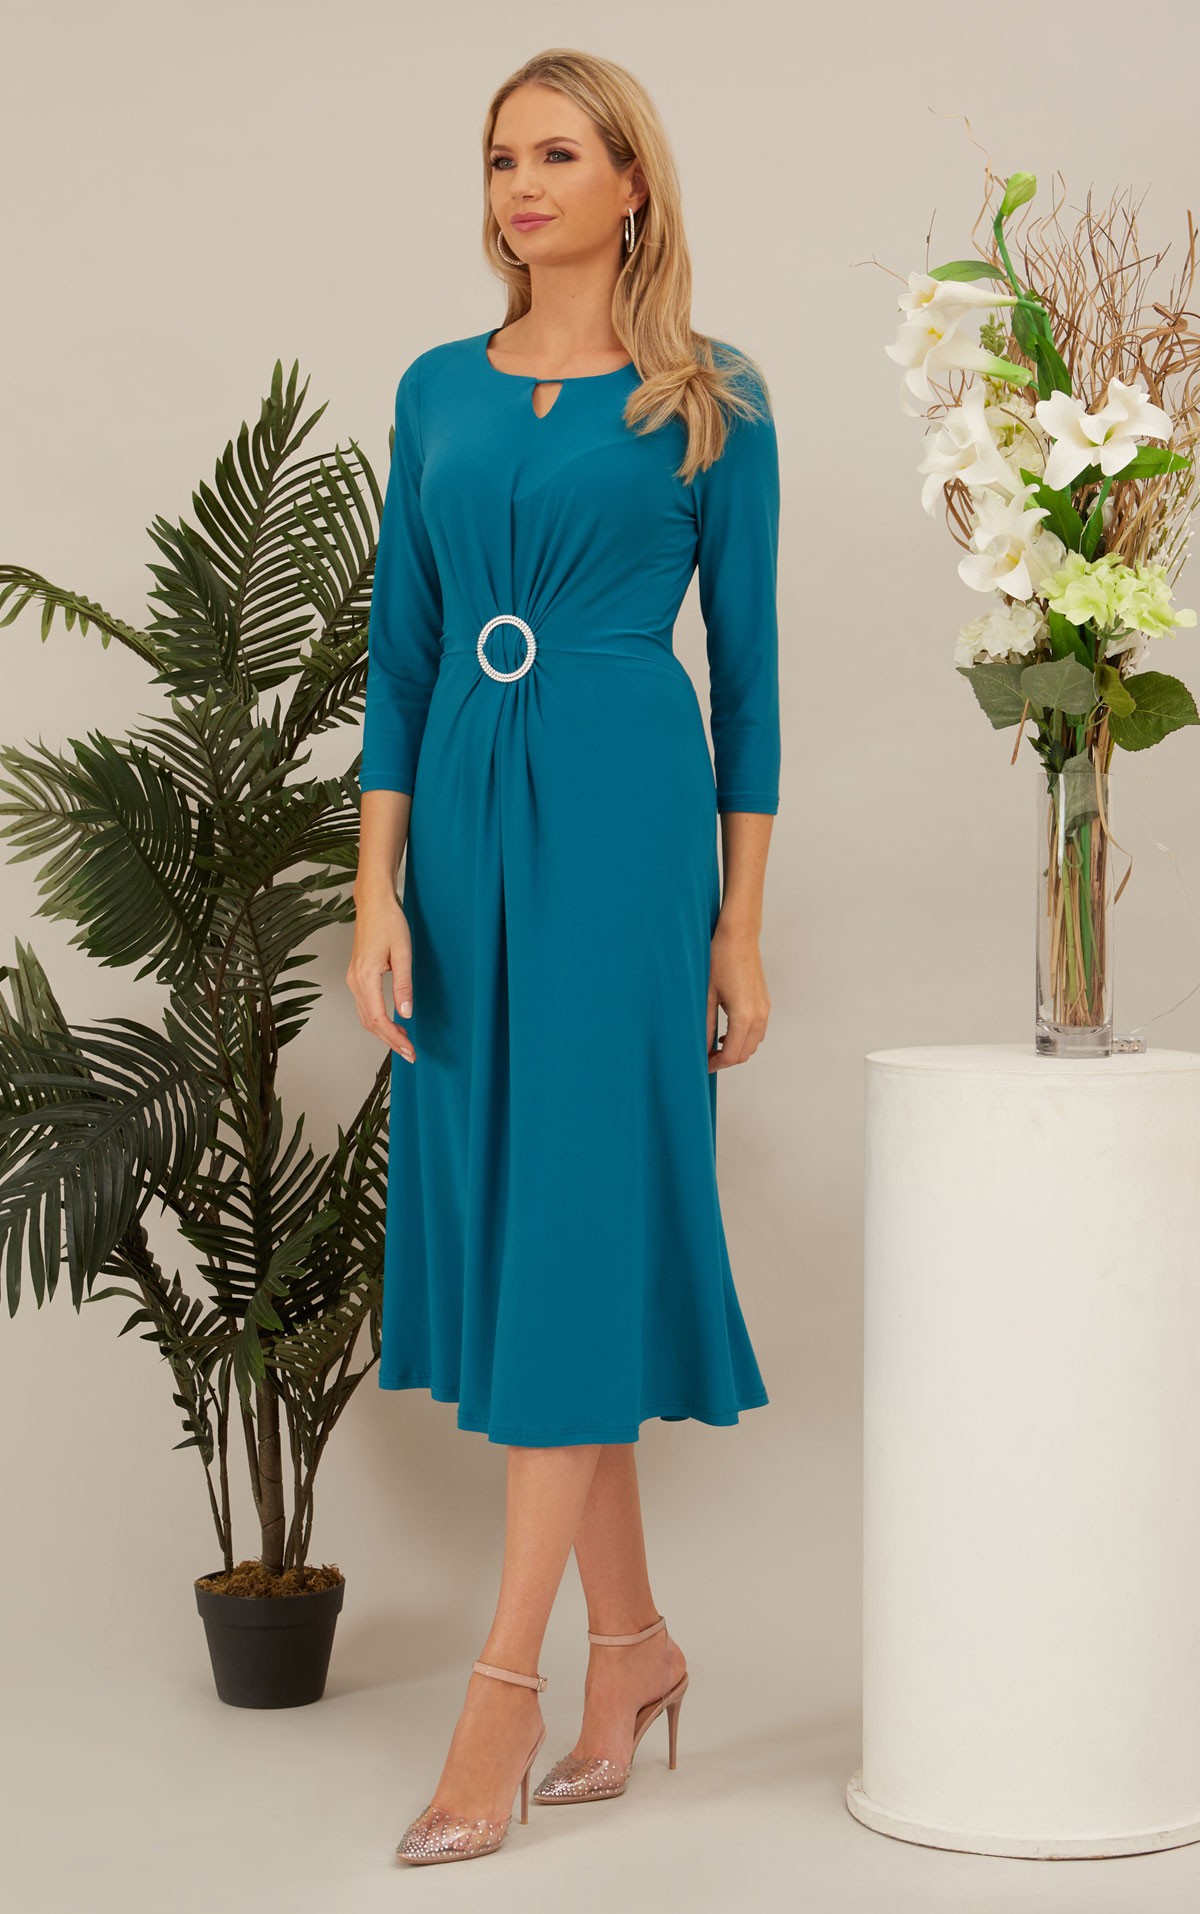 Glitz - 1244 Size 14 & 18 - Glitz 1244 Beautiful Teal Jersey dress with sleeves- Perfect occasion, Informal wedding & Lady Guest Dresses at Occasions at Blessings, 1 Loyal Parade, Mill Rise, Westdene, Brighton. E.Sussex BN1 5GG  - Free Easy Parkings T: 01273 505766 E: info@blessingsbridal.co.uk